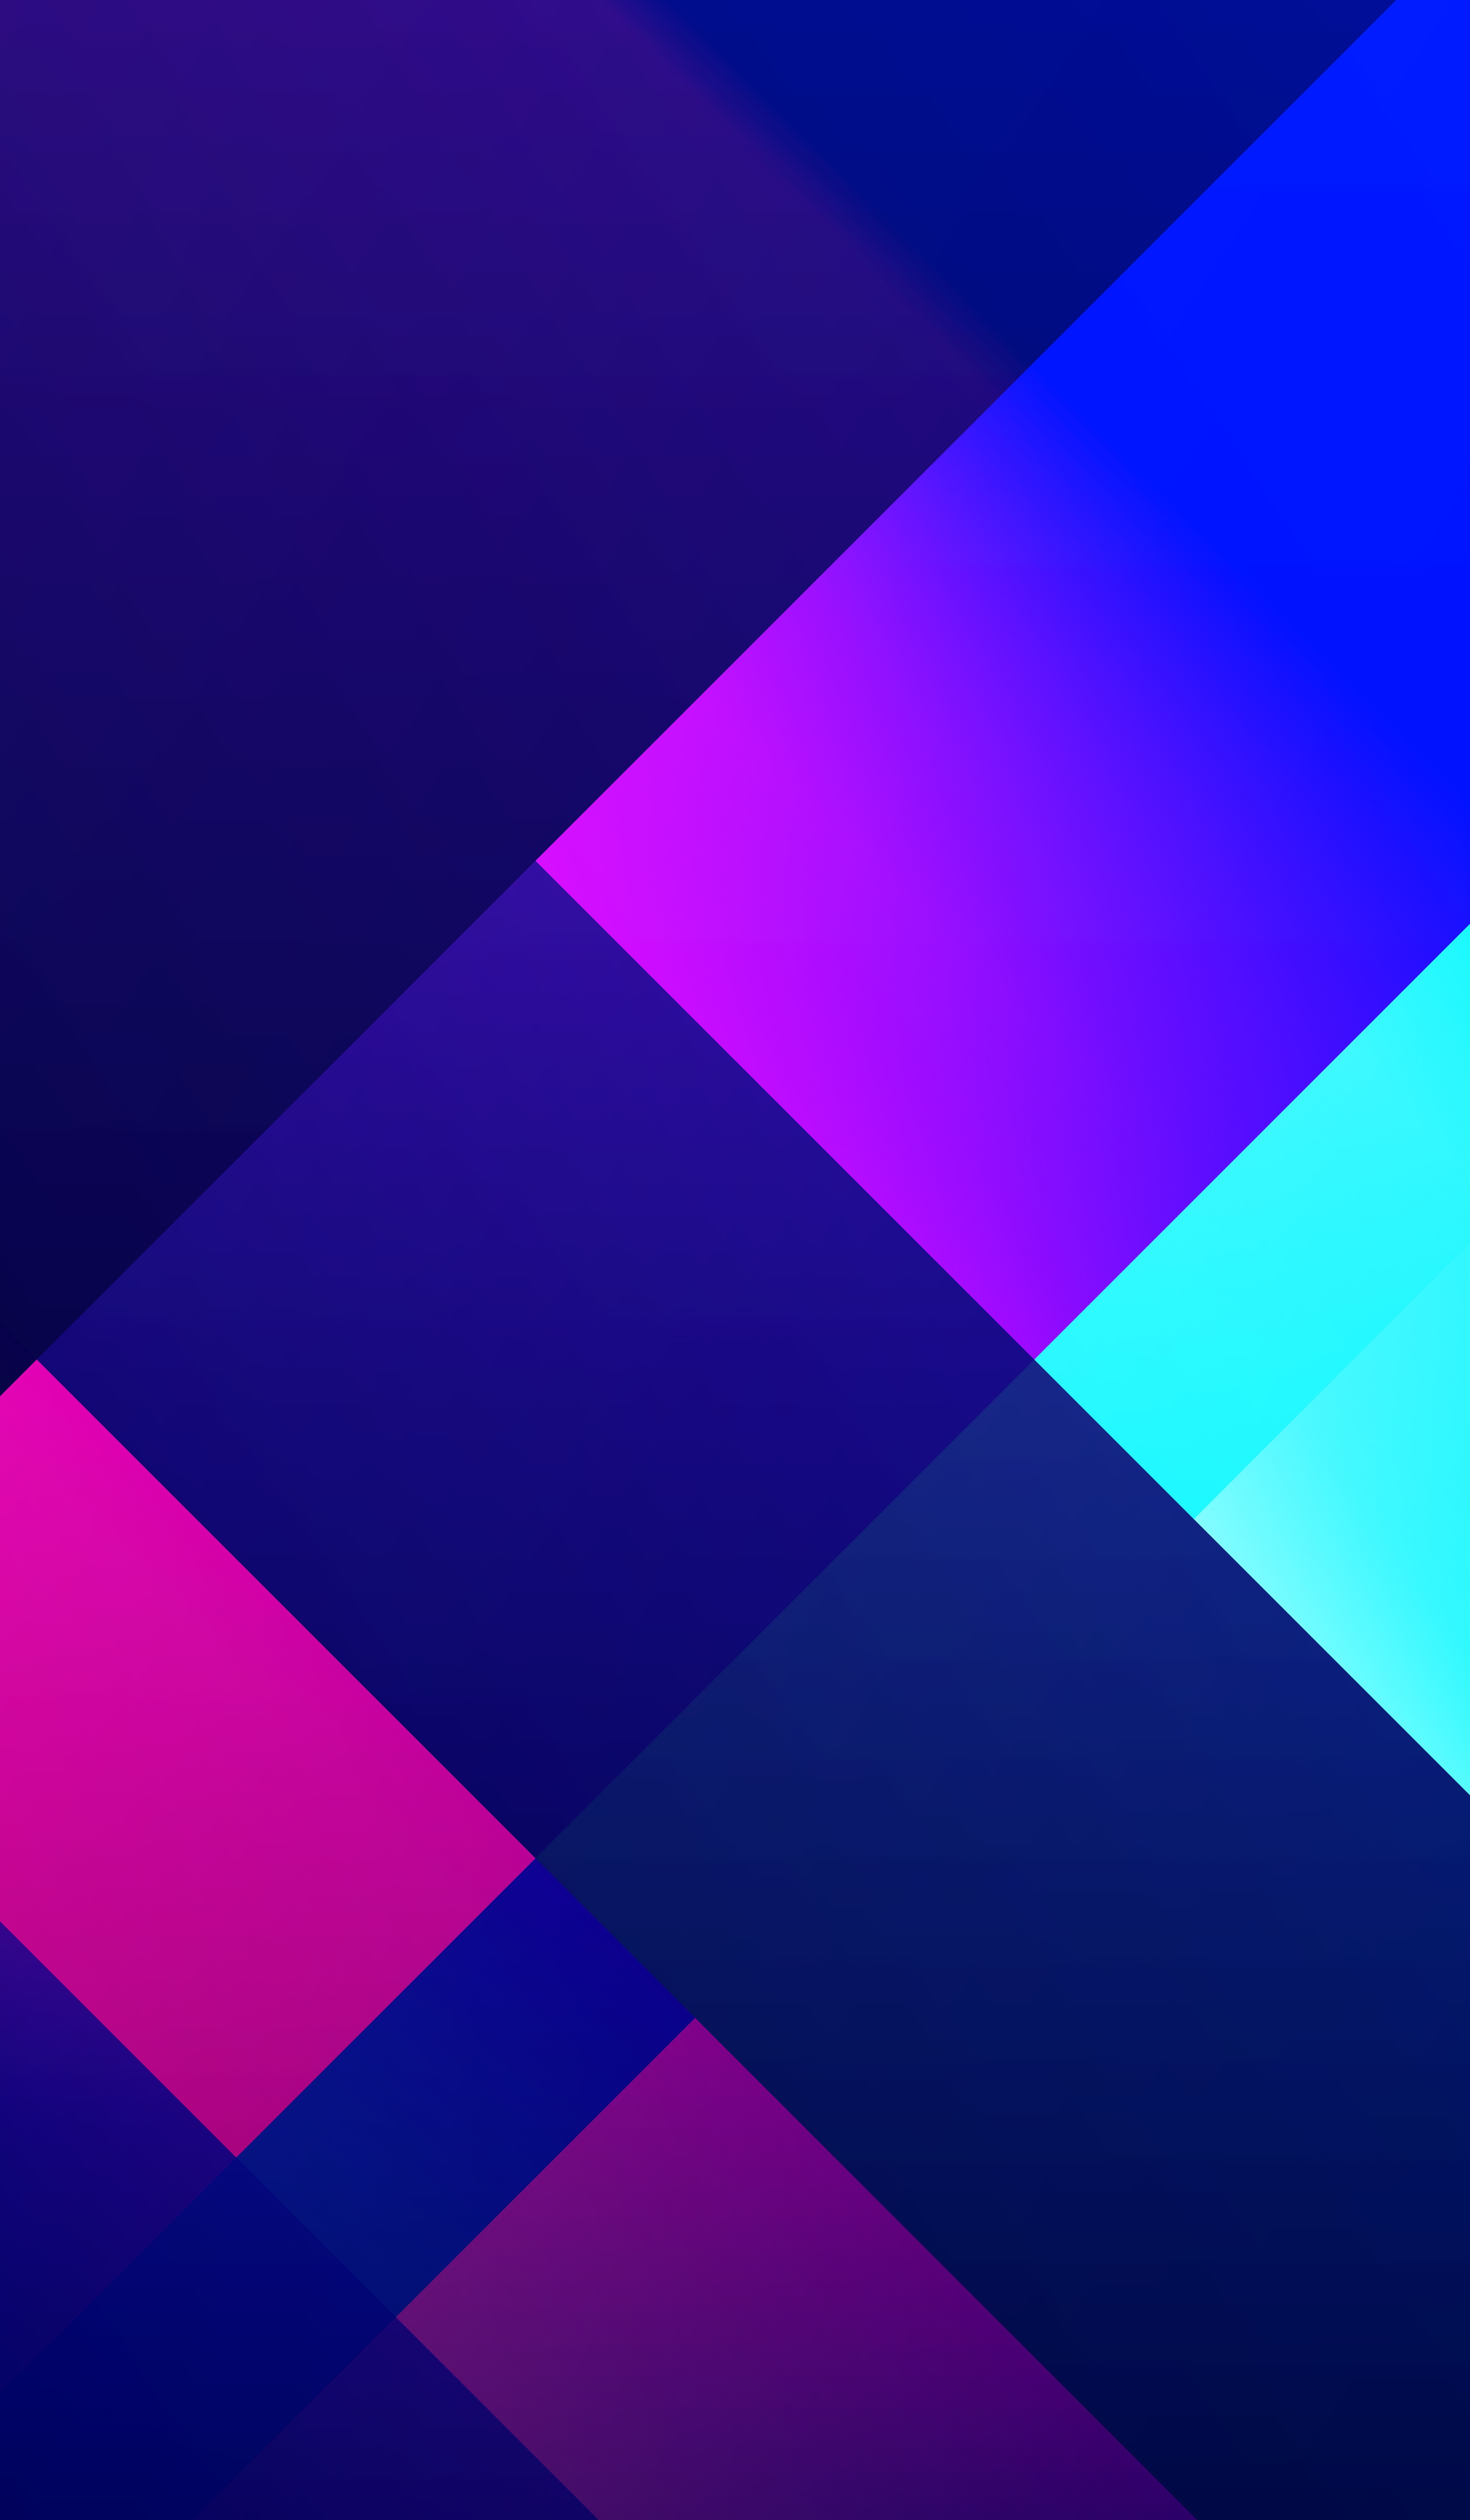 motley, geometry, gradient, abstract, multicolored phone background